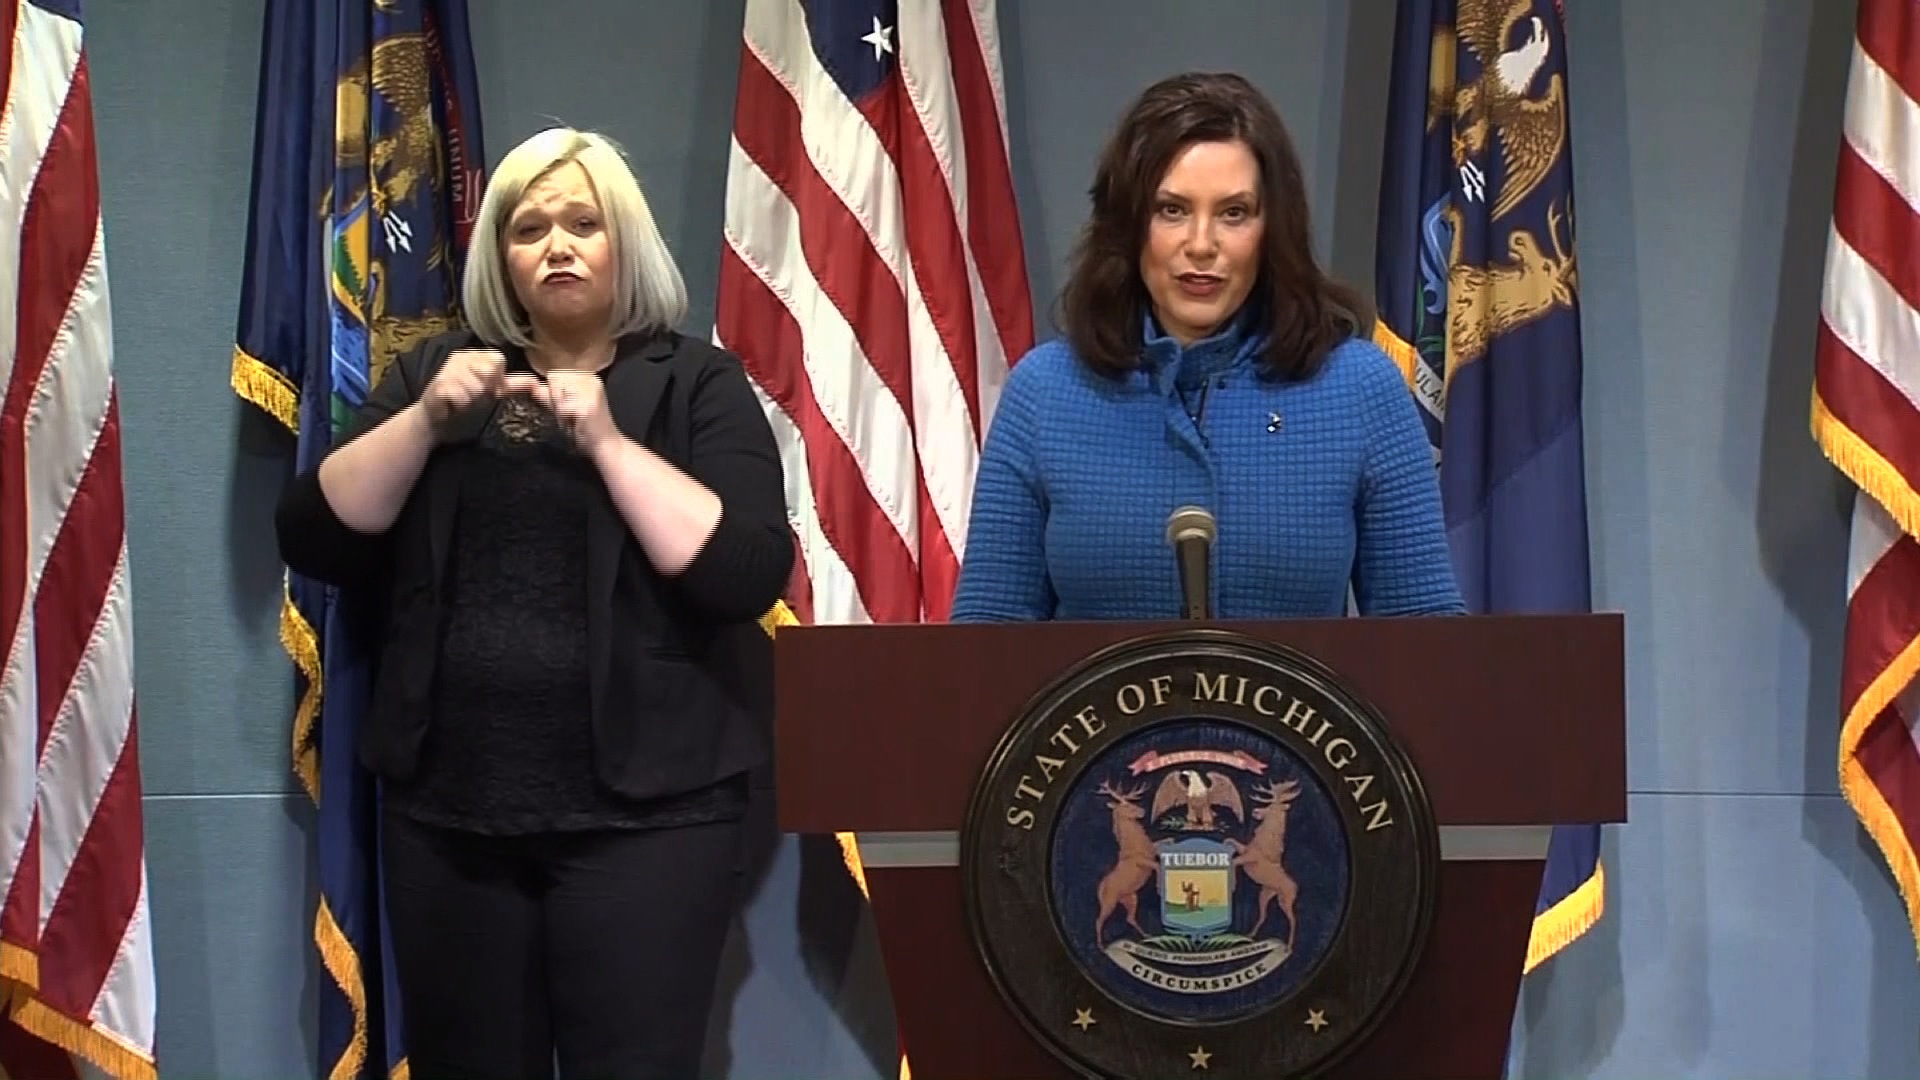 Michigan Gov. Gretchen Whitmer, right, speaks during a press conference in Lansing, Michigan, on May 18.